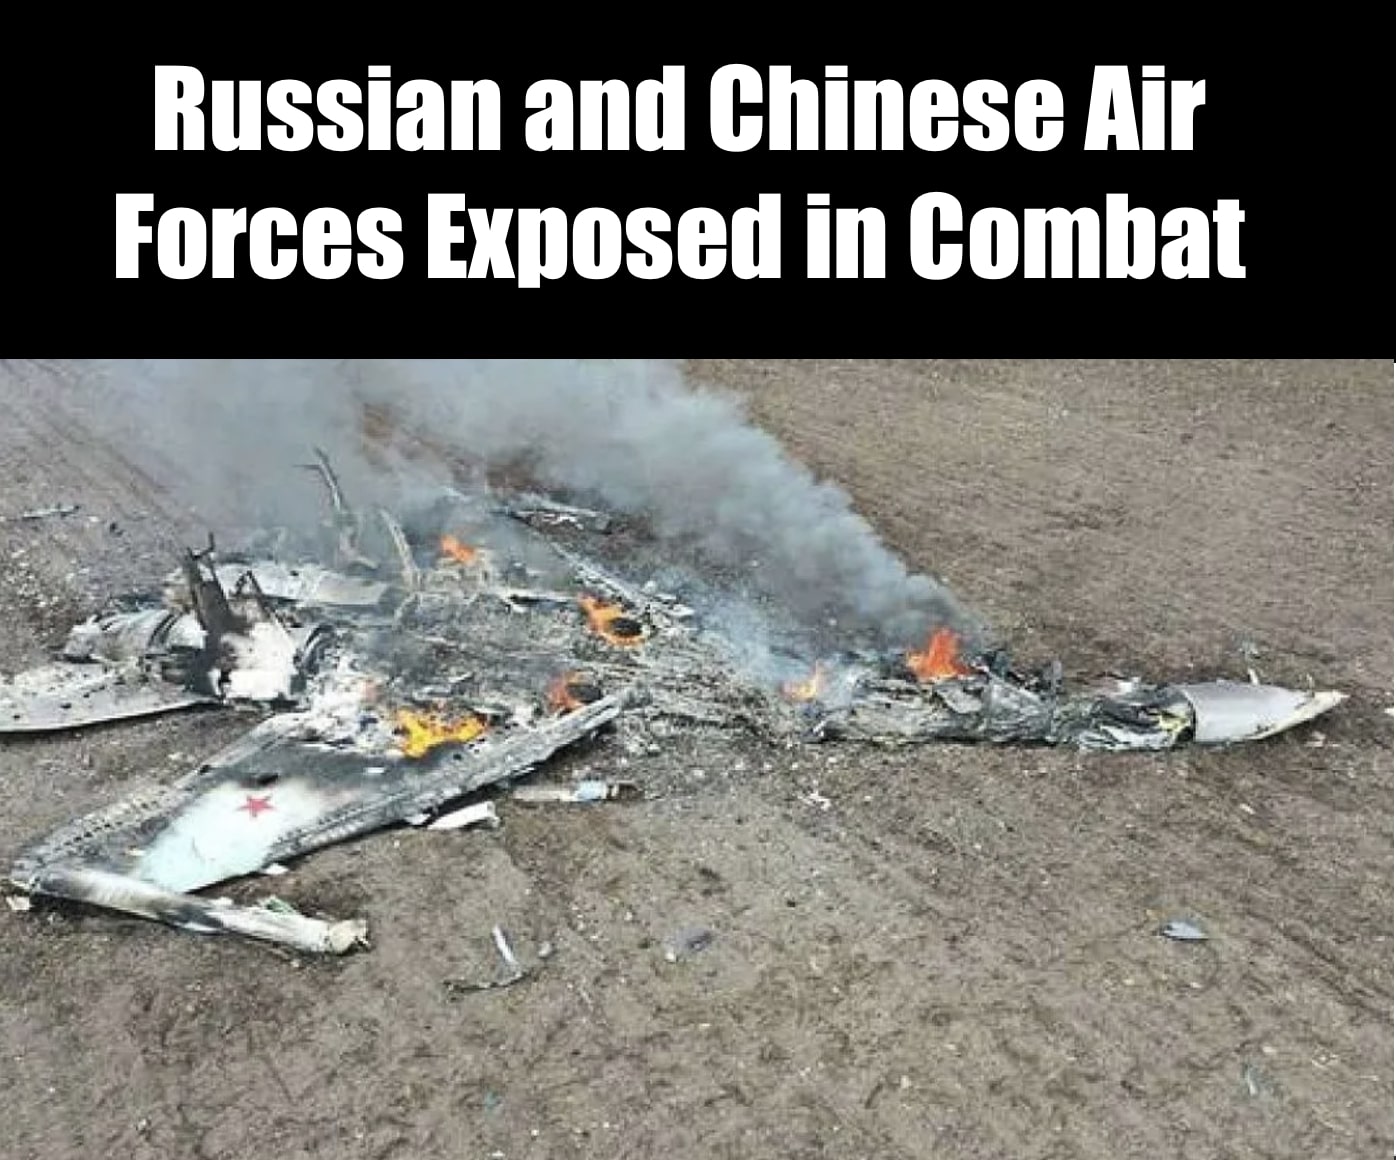 China and Russia’s Air Forces Uncovered in Precise Fight